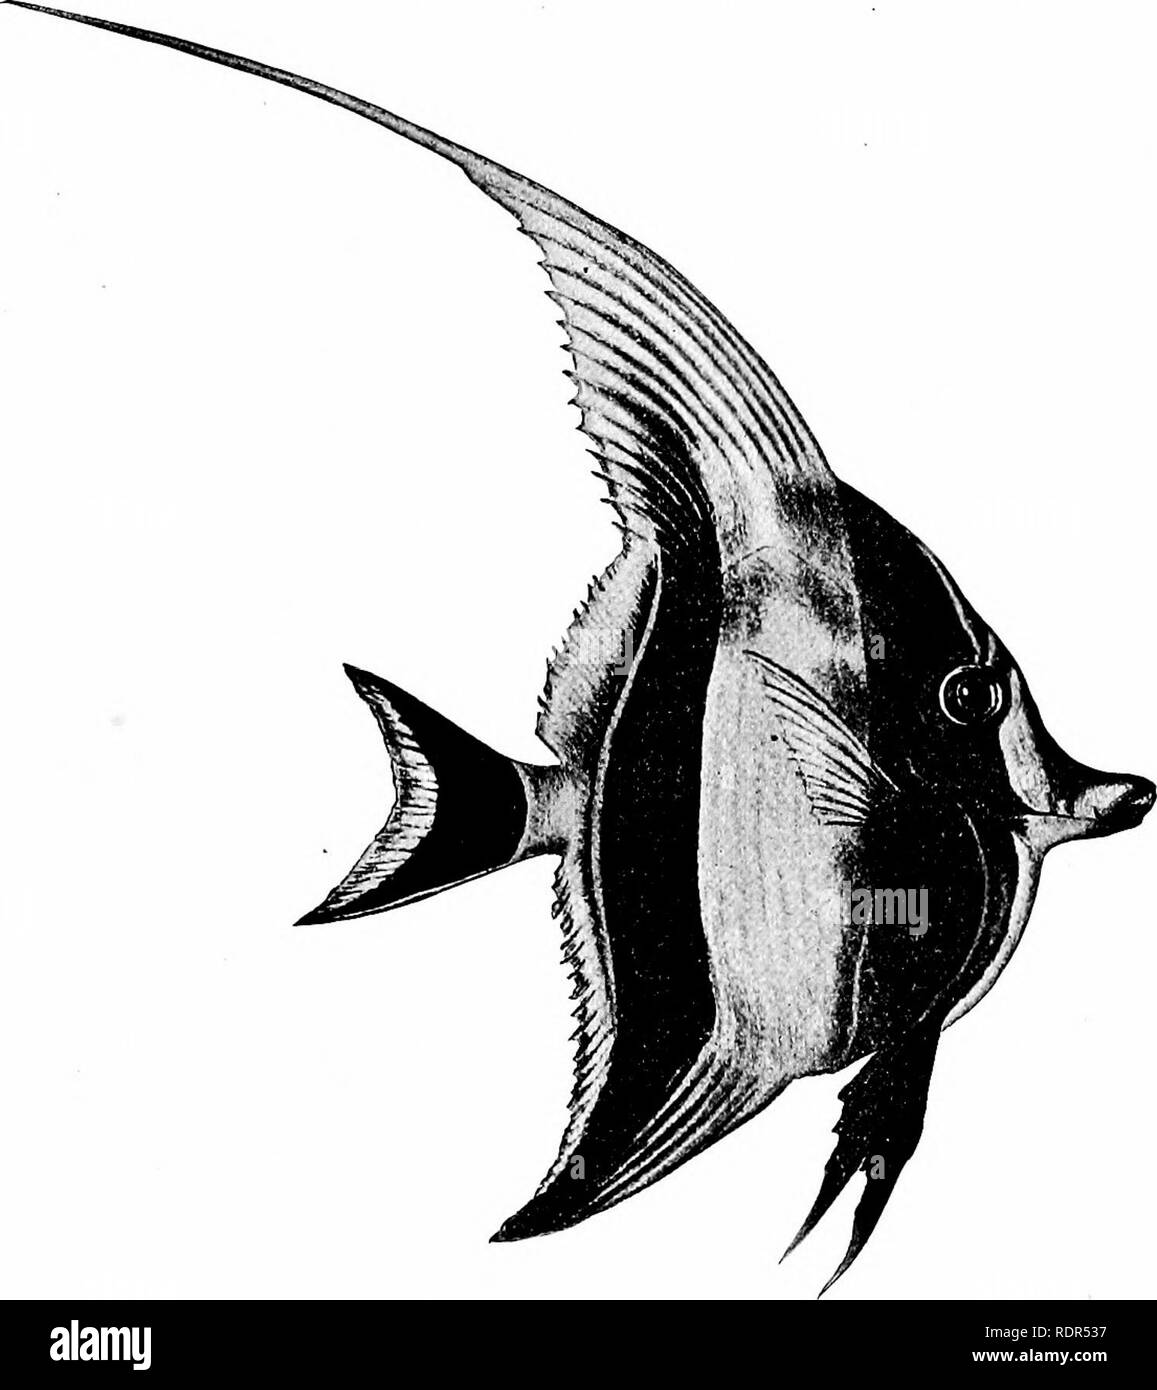 . Fishes. Fishes. The Squamipinnes 617 the Eocene genera, Aulorhamphus (bolceusis), with produced snout, and Apostasis (croaticus), with long spinous dorsal, prob- ably belong. The Moorish Idols: Zanclidse. — The family of ZanclidcE in- cludes a single species, the Moorish idol or kihi kihi, Zanclus canescens. In this family the scales are reduced to a fine sha-. FiG. 511.—The Moorish Idol, Zanclus canescens (Linnaeus). From Hawaii. Family Zanclidoe. (Painting by Mrs. E. G. Norris.) green, and in the adult two bony horns grow out over the eye. The dorsal spines are prolonged in filaments and t Stock Photo